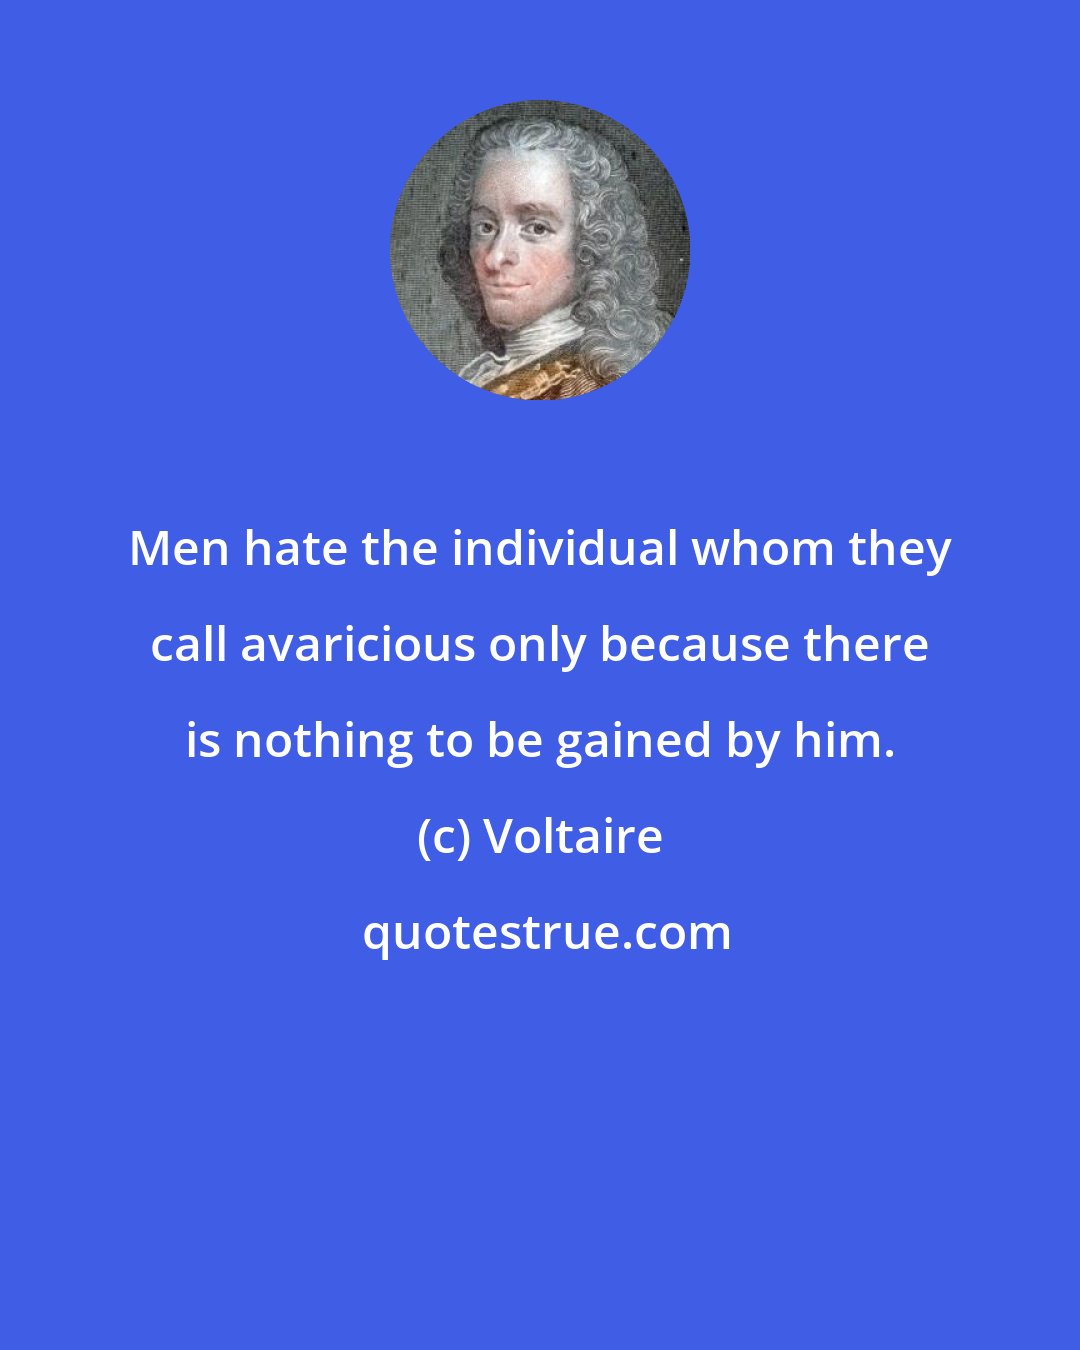 Voltaire: Men hate the individual whom they call avaricious only because there is nothing to be gained by him.